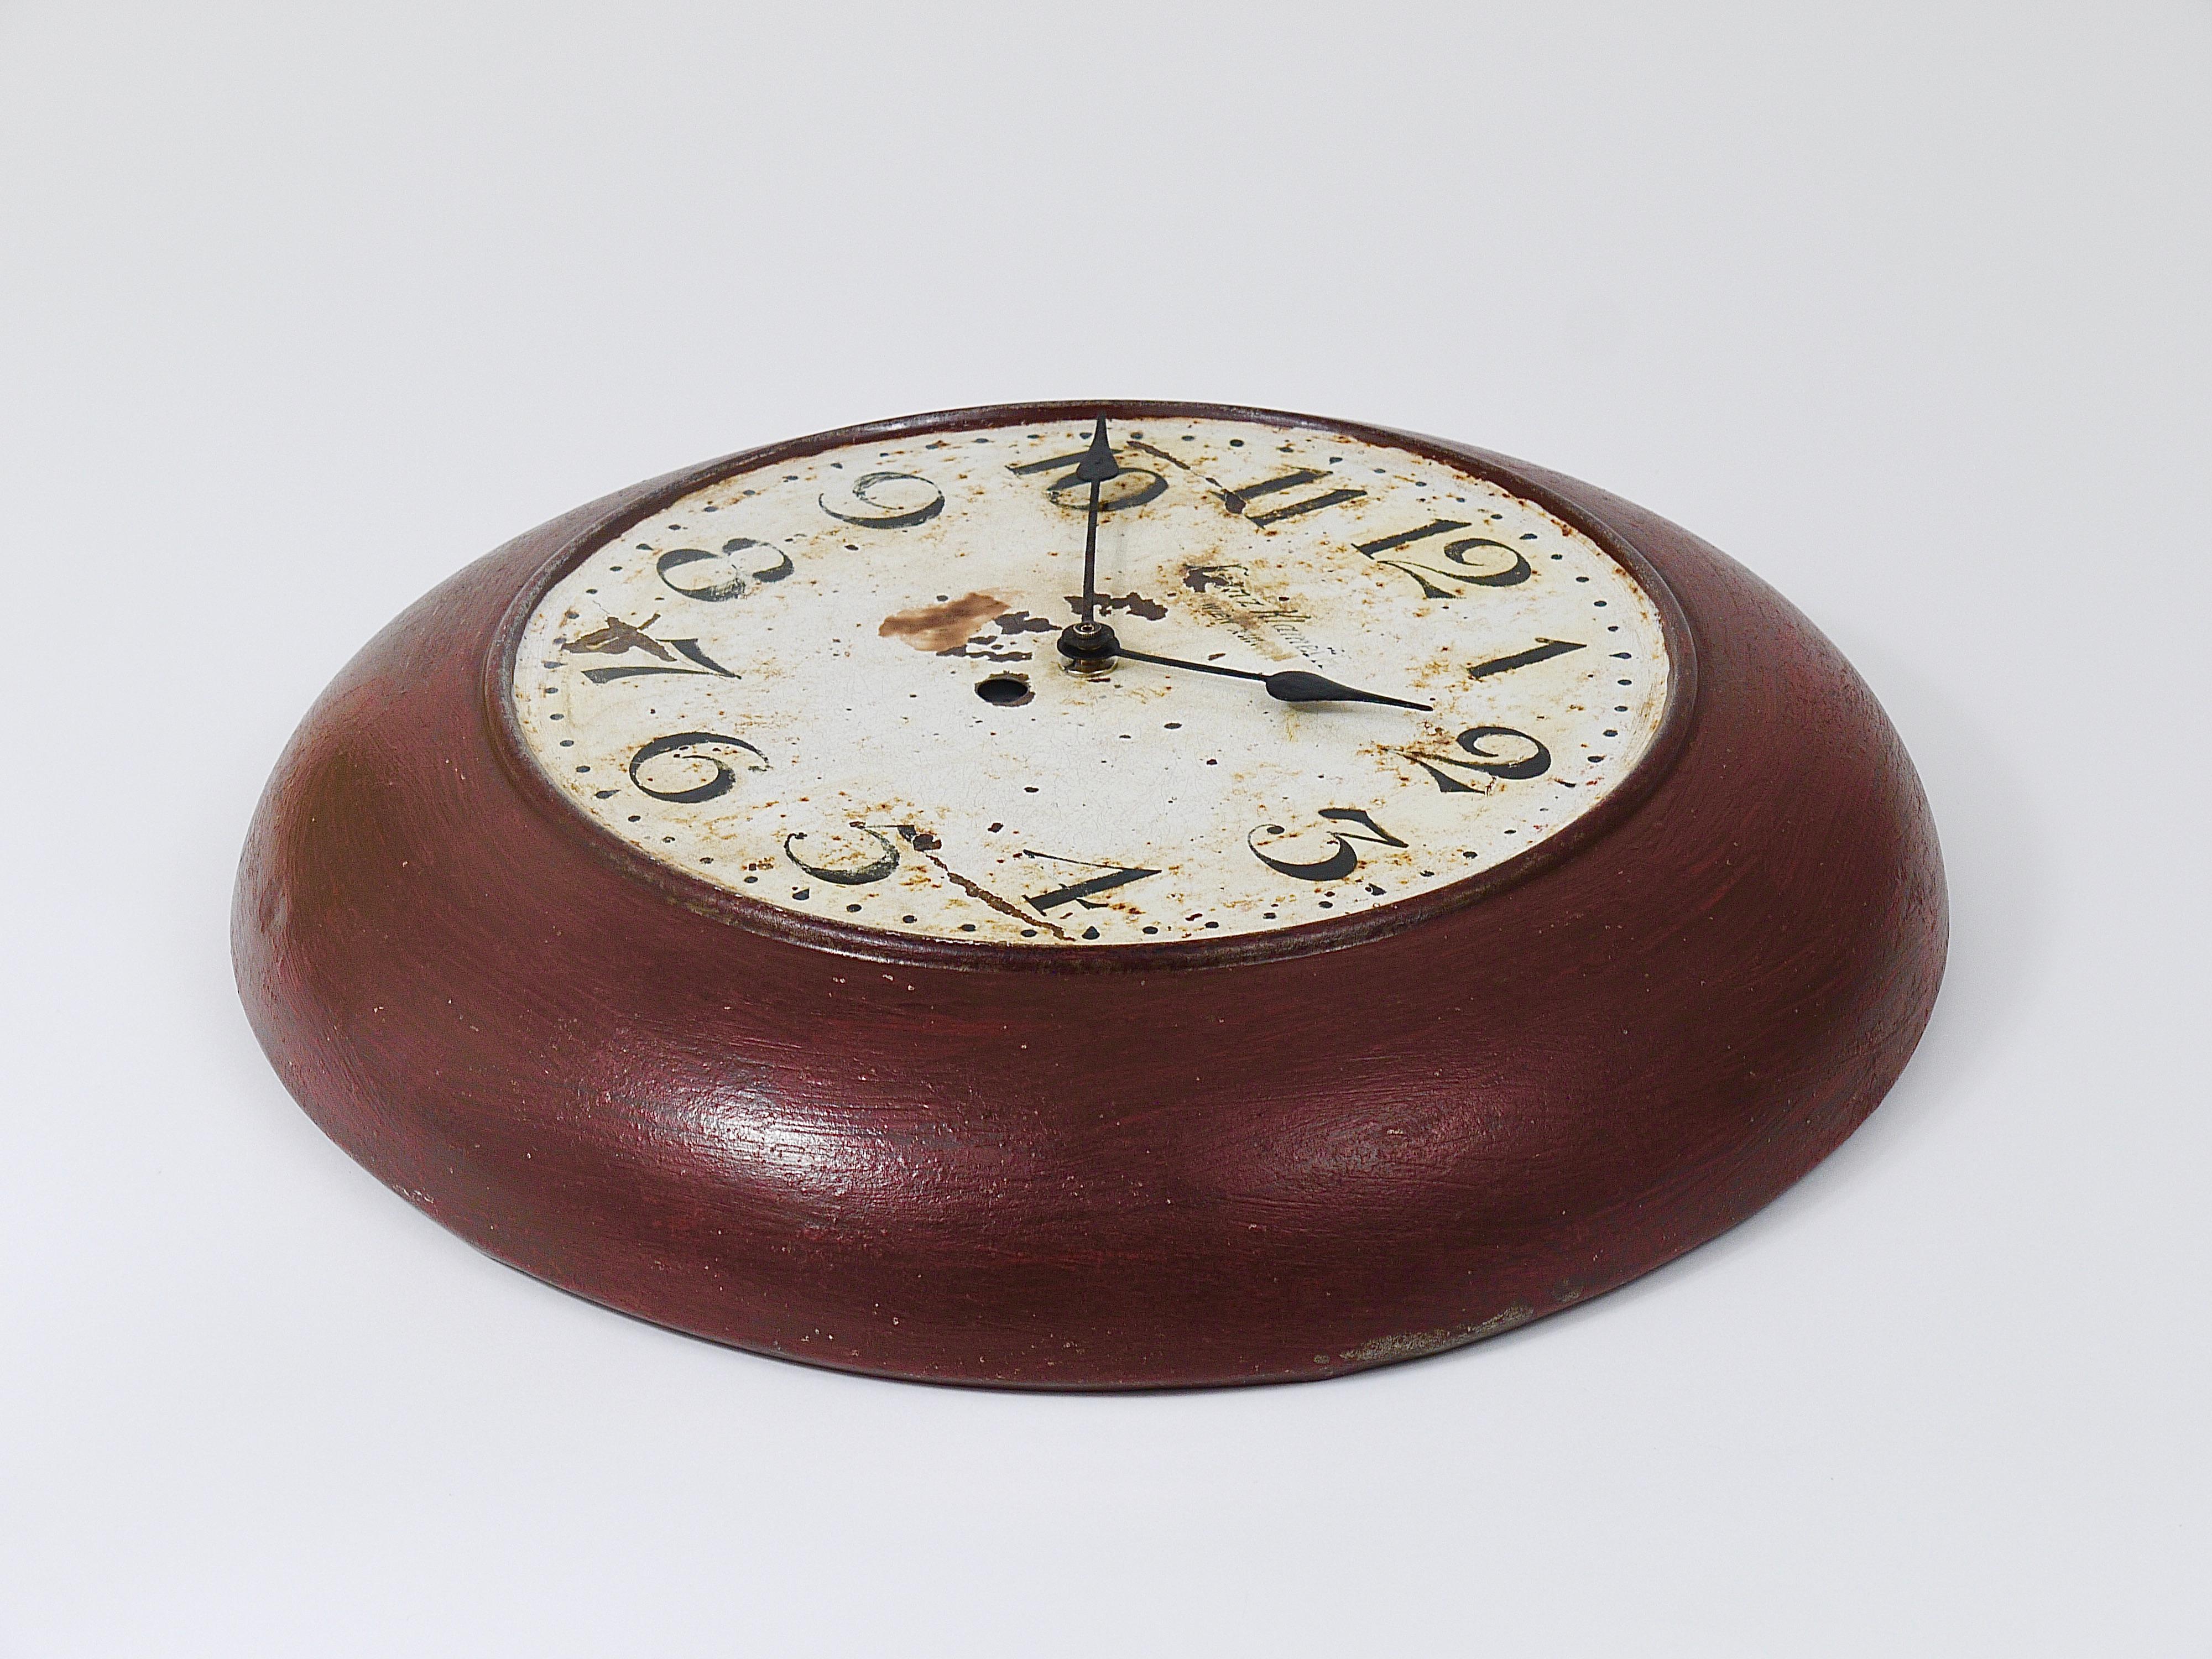 Antique 1920s Public Iron Wall Clock With Hand-Painted Dial, Industrial Style For Sale 9